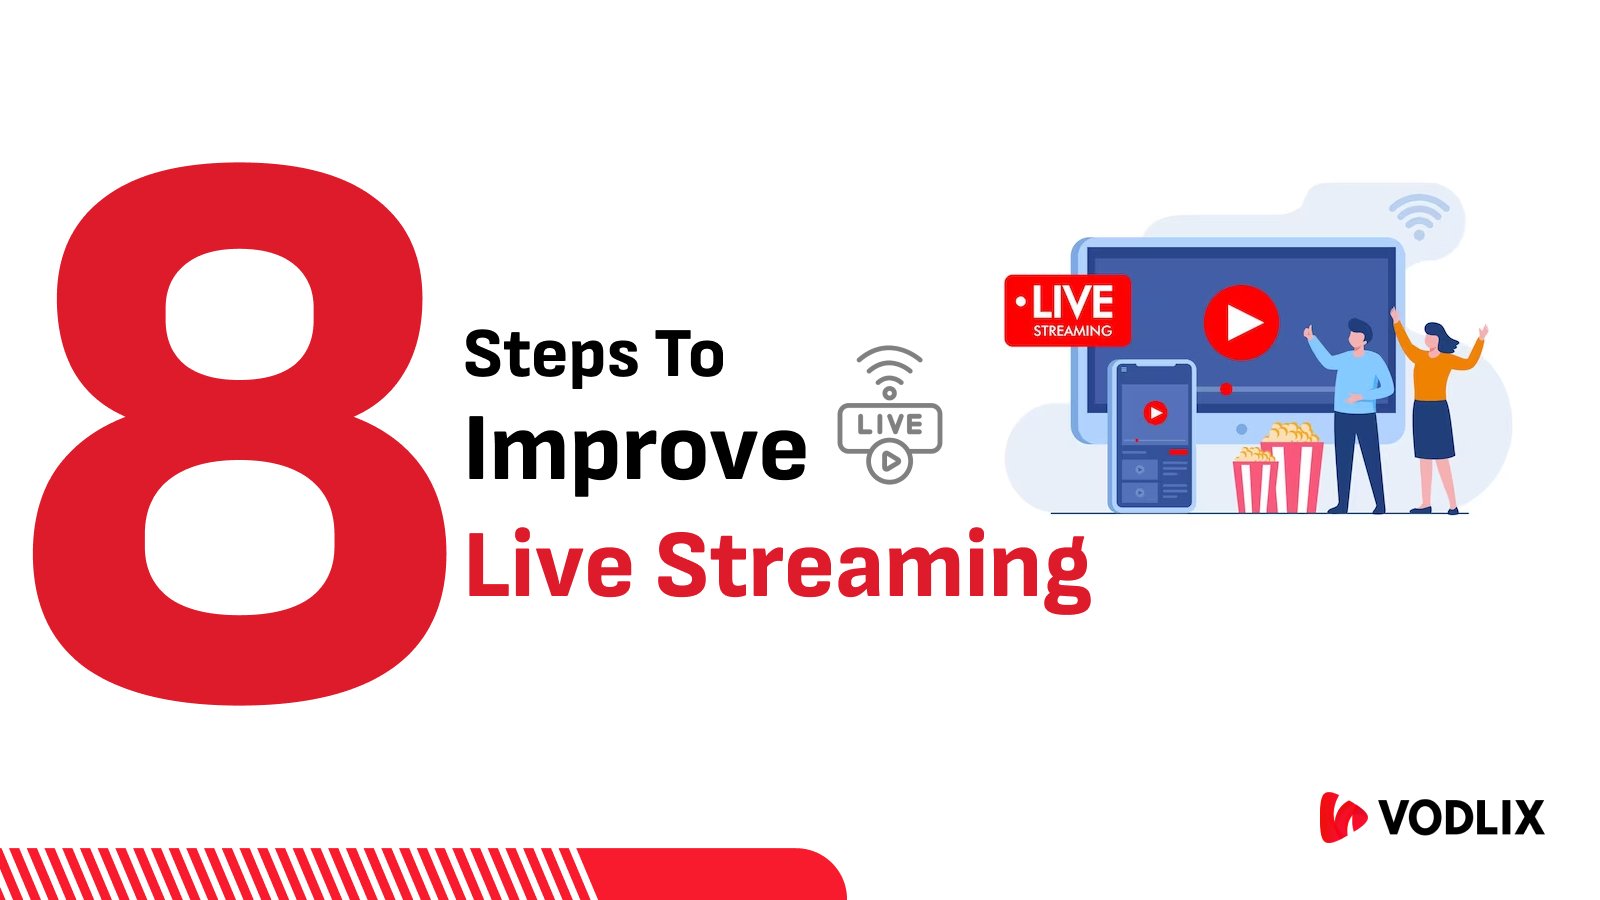 How to Improve Live Streaming Quality in 8 Steps